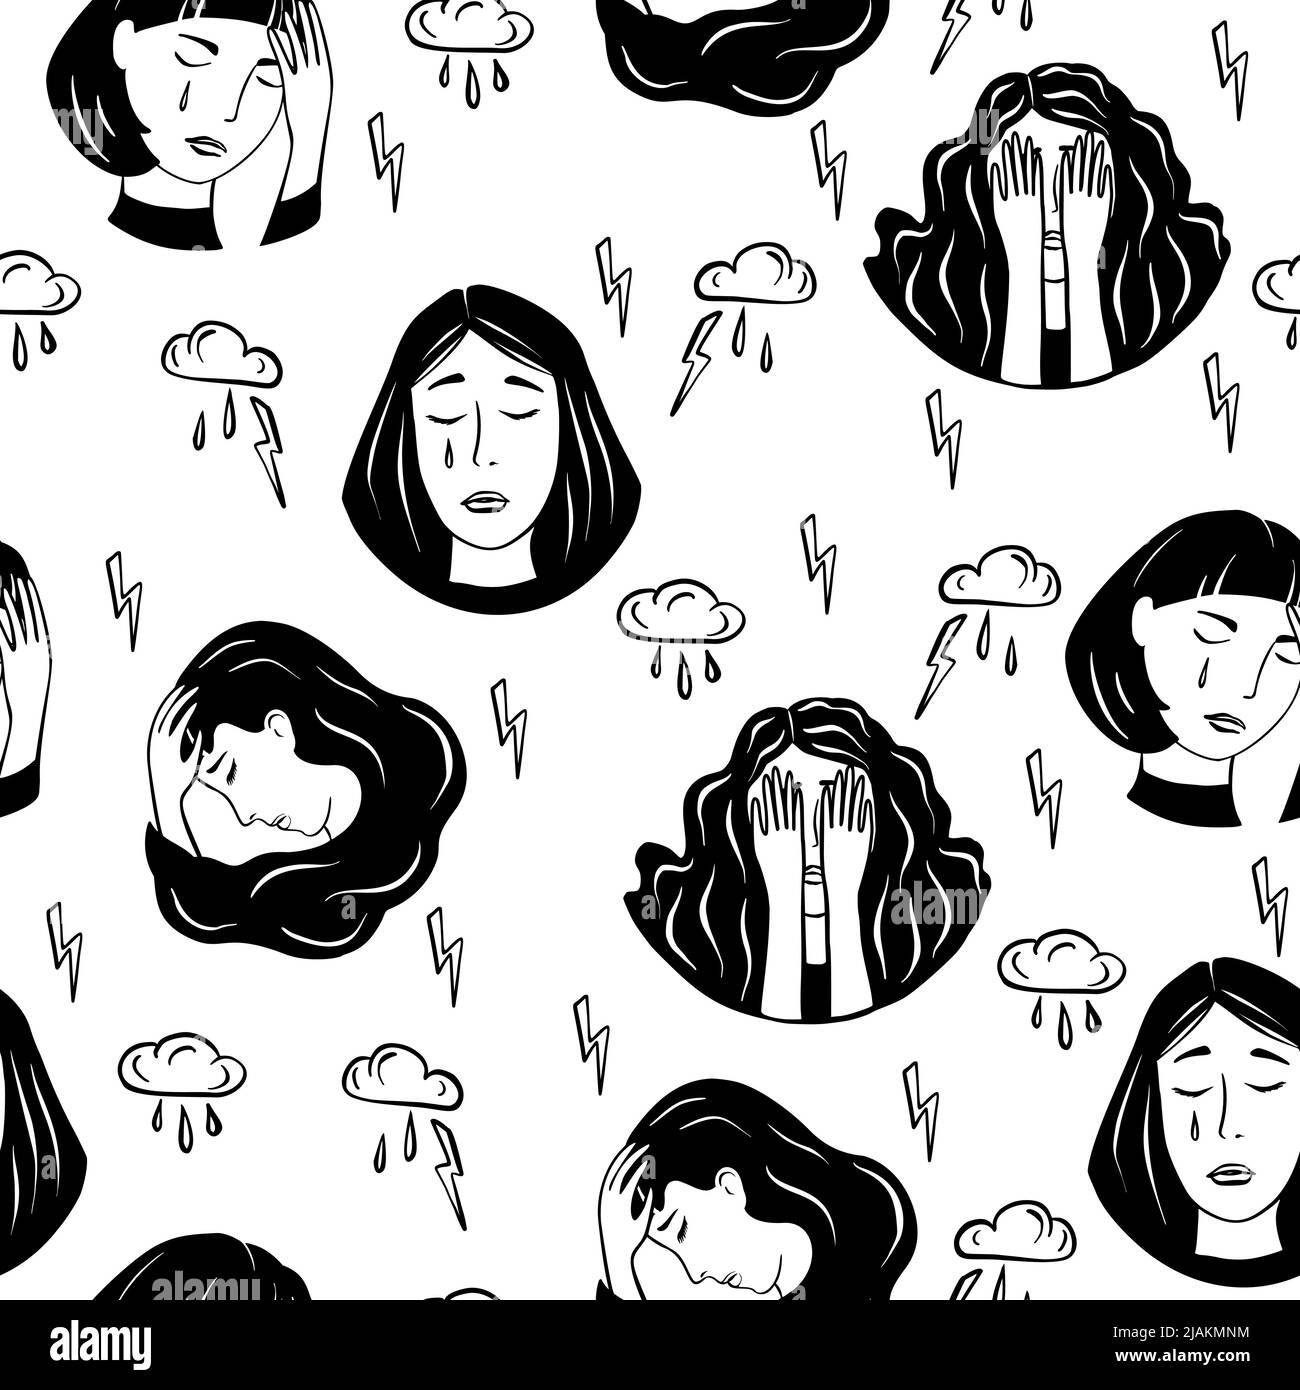 Seamless pattern with depressed, crying and sad girl portraits. Anxiety, mental disorder or violation concept background. Stock Vector